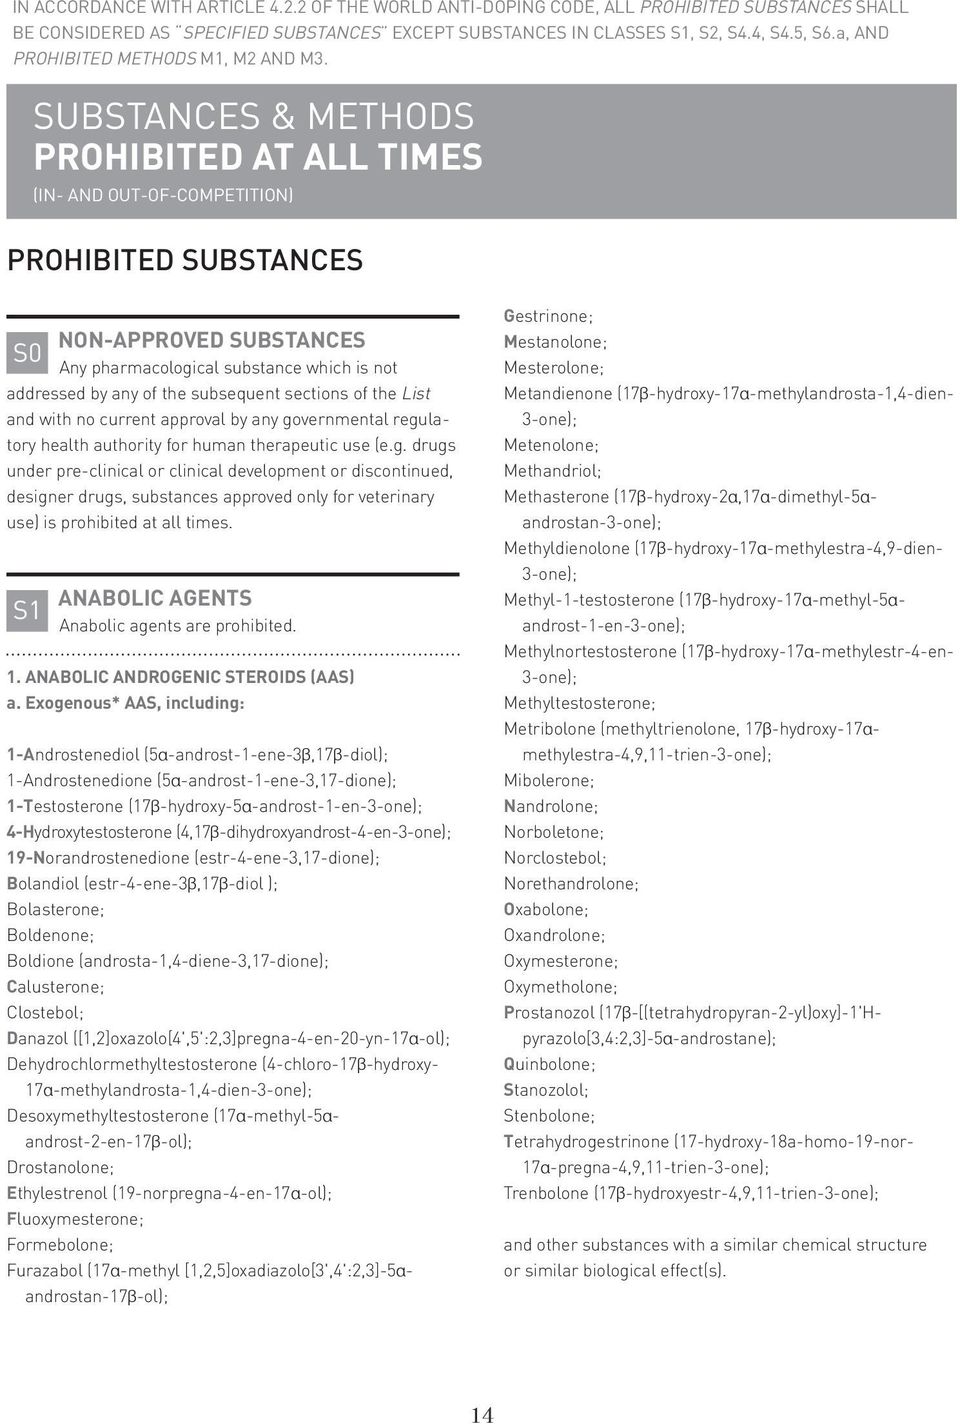 SUBSTANCES & METHODS PROHIBITED AT ALL TIMES (IN- AND OUT-OF-COMPETITION) PROHIBITED SUBSTANCES NON-APPROVED SUBSTANCES S0 Any pharmacological substance which is not addressed by any of the